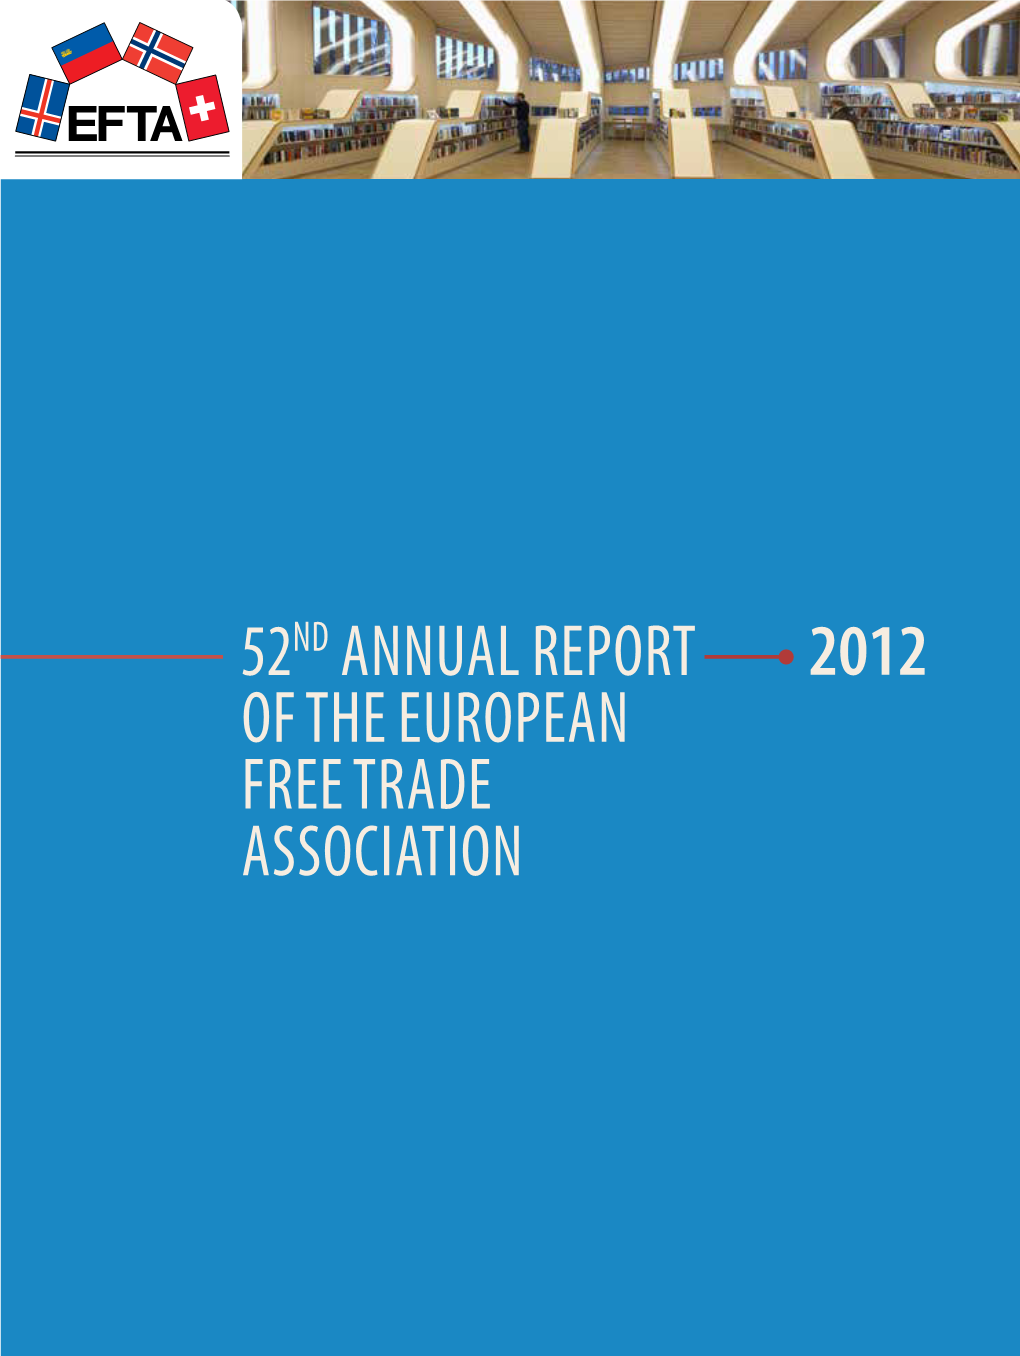 2012 52Nd Annual Report of the European Free Trade Association